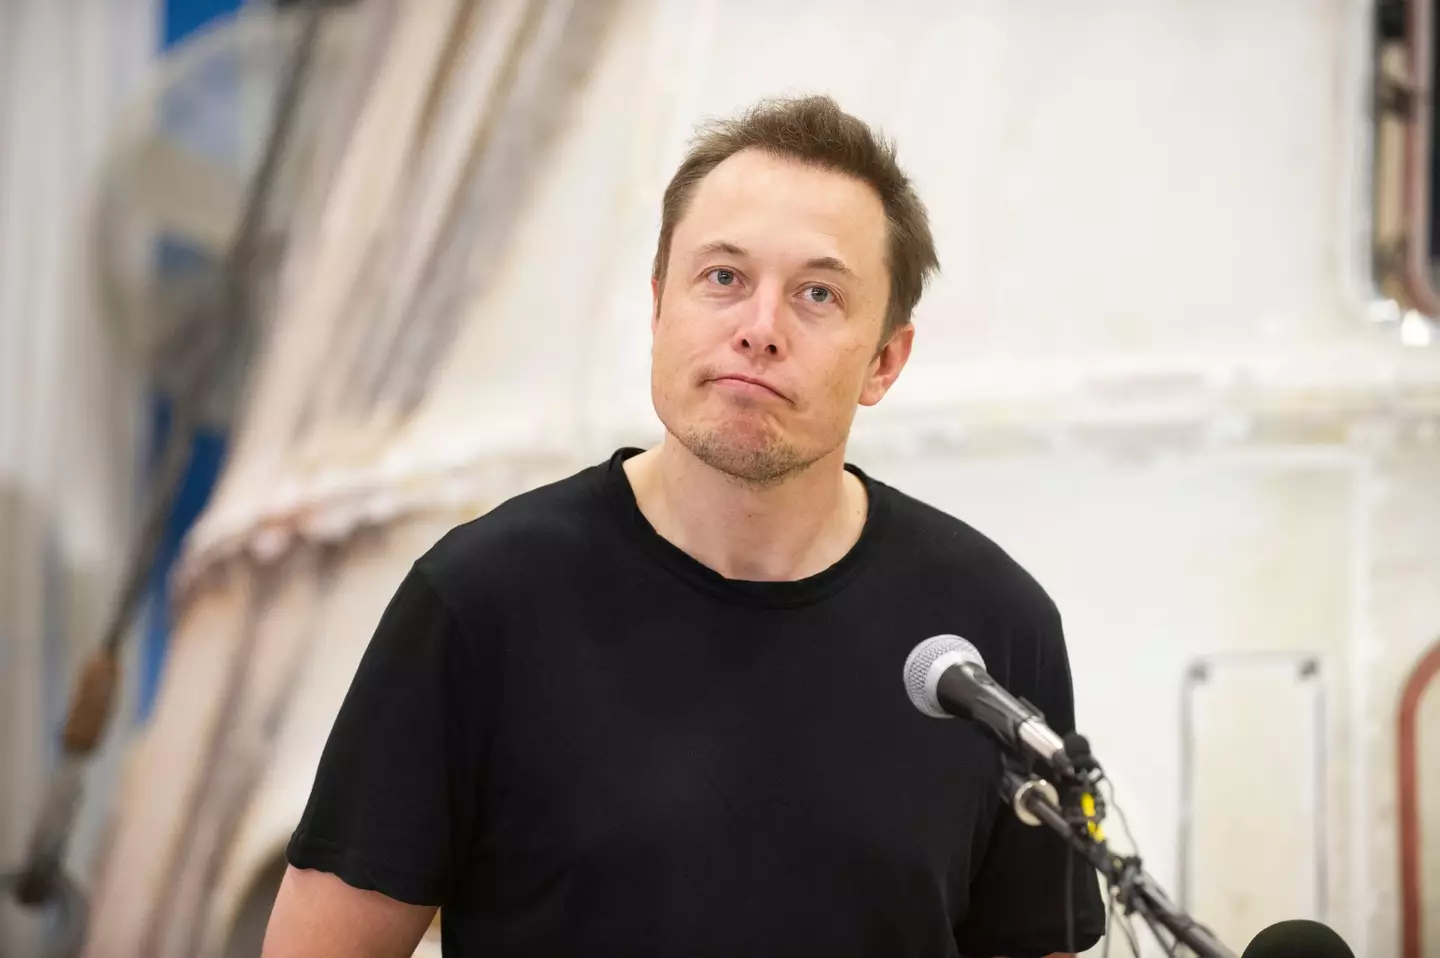 Twitter’s board is considering using a ‘poison pill’ method to prevent Elon Musk from purchasing the company.